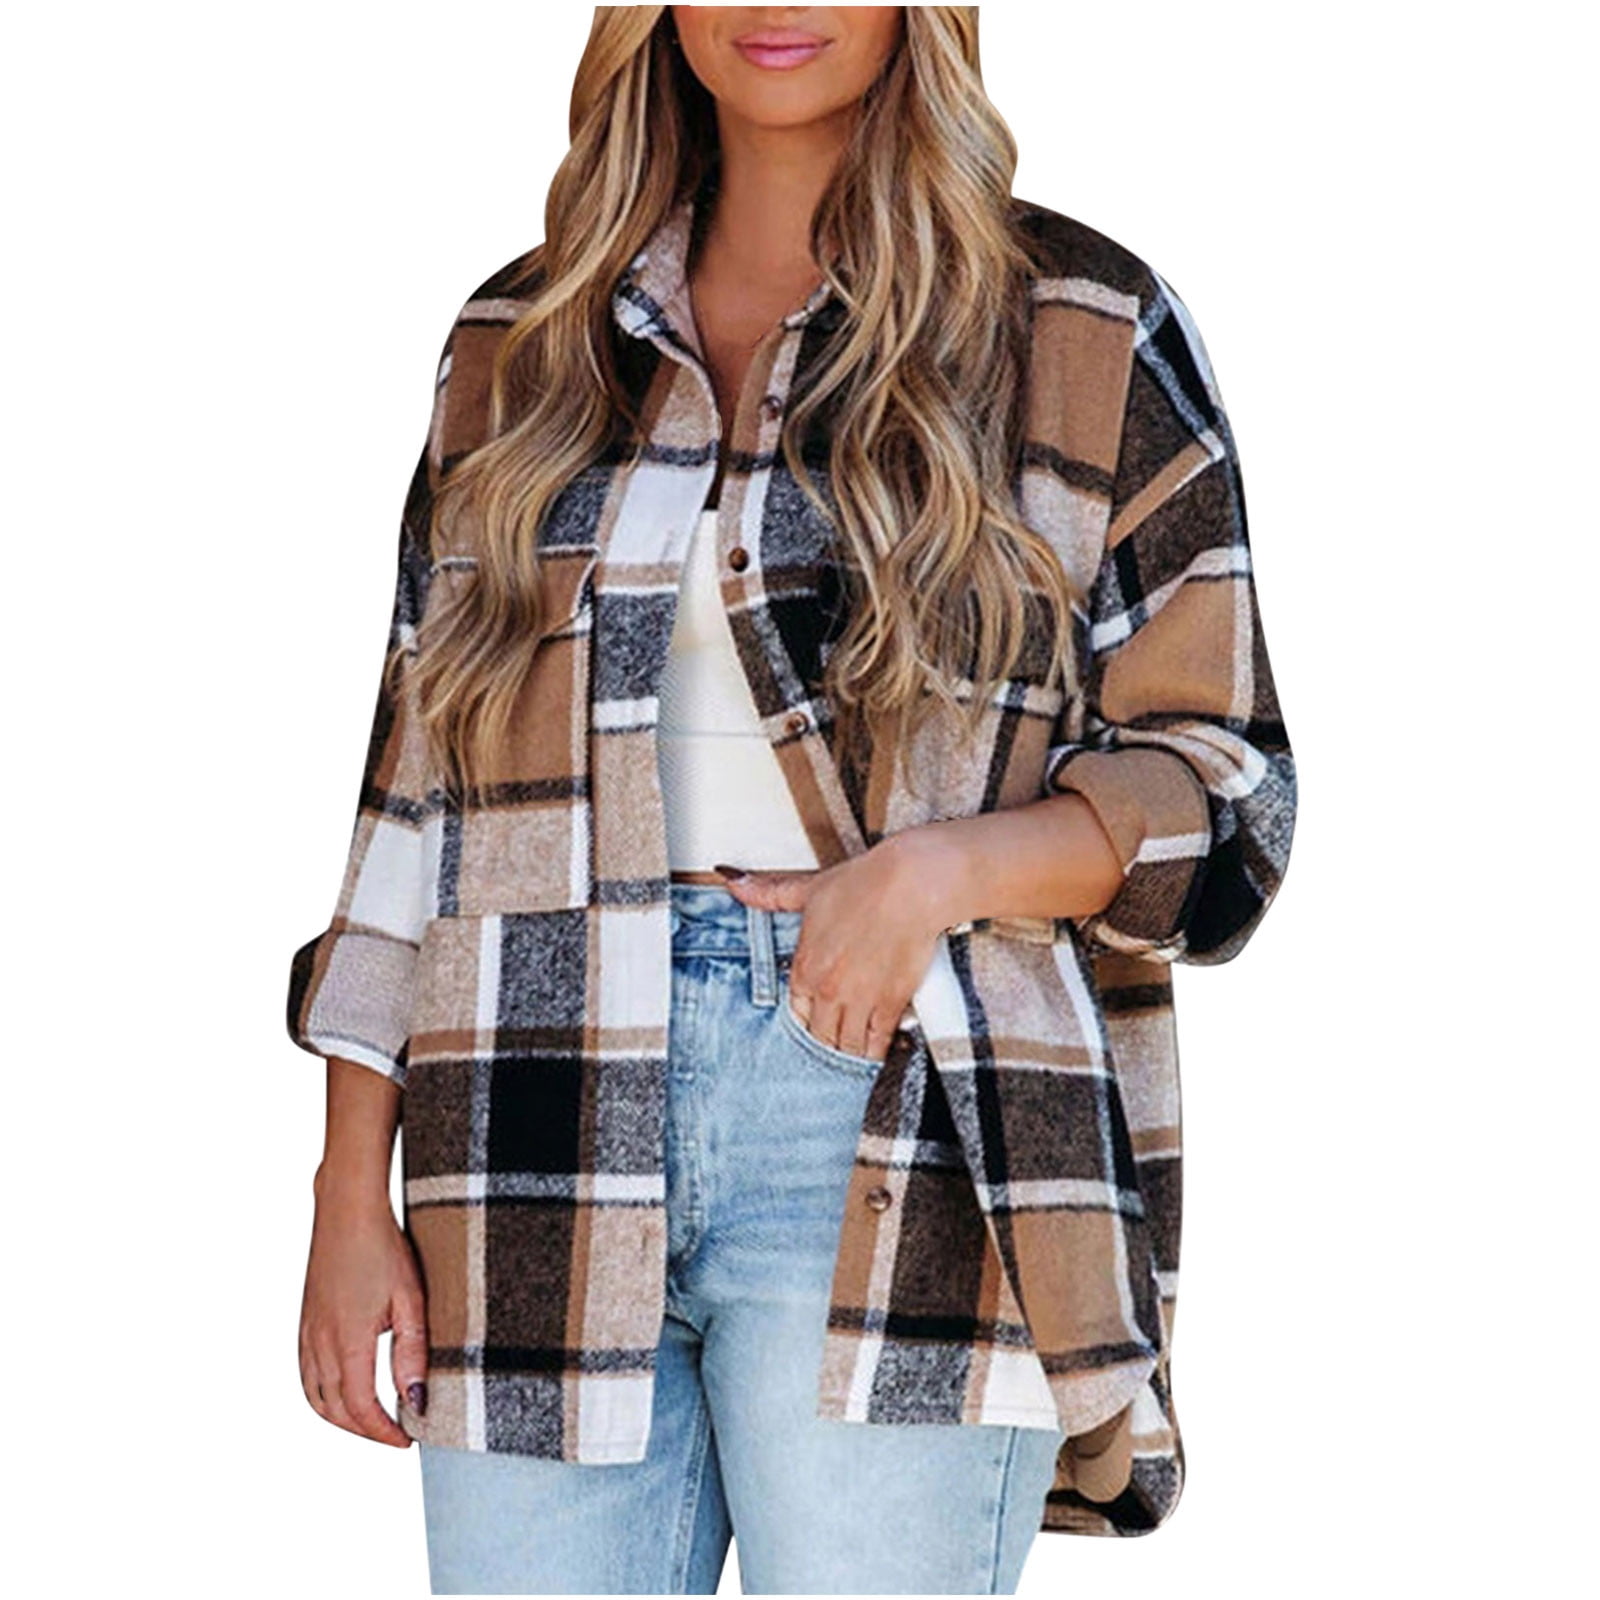 JGGSPWM Plaid Flannel Shirt for Women Oversized Long Sleeve Button Down  Shirts Casual Loose Blouse Tops Fall Outwear Spring Clothing Hot Pink L 